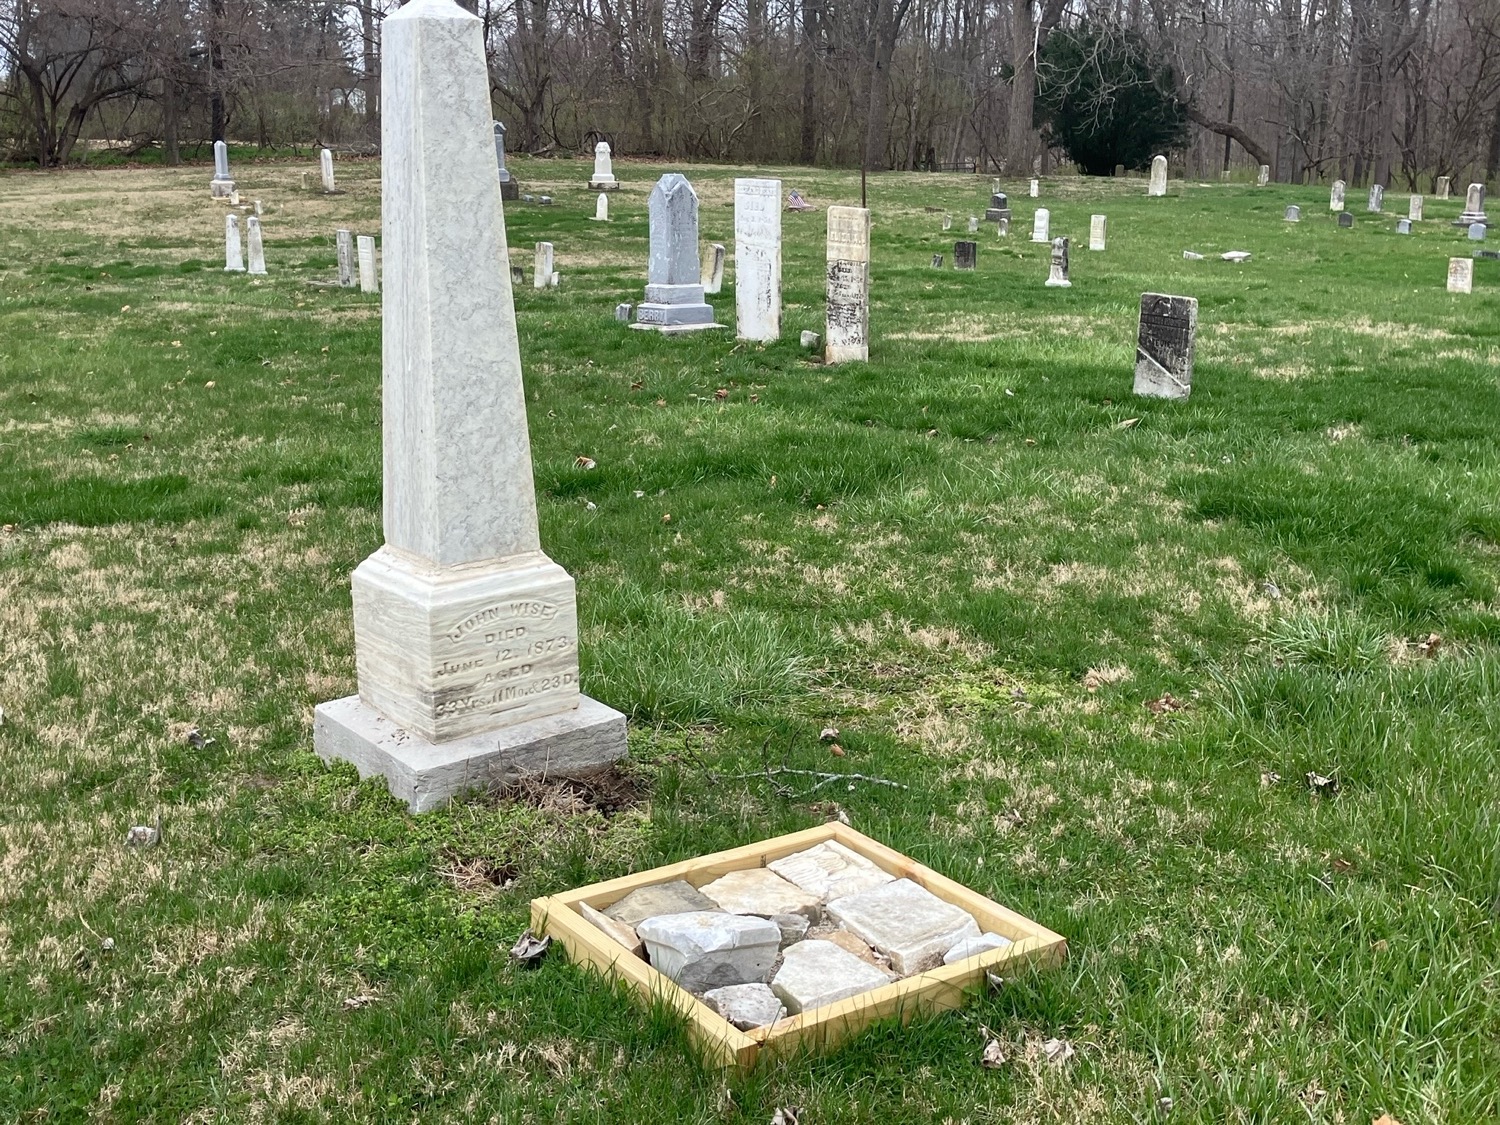 Cemetery restoration largely completed - Western Wayne News